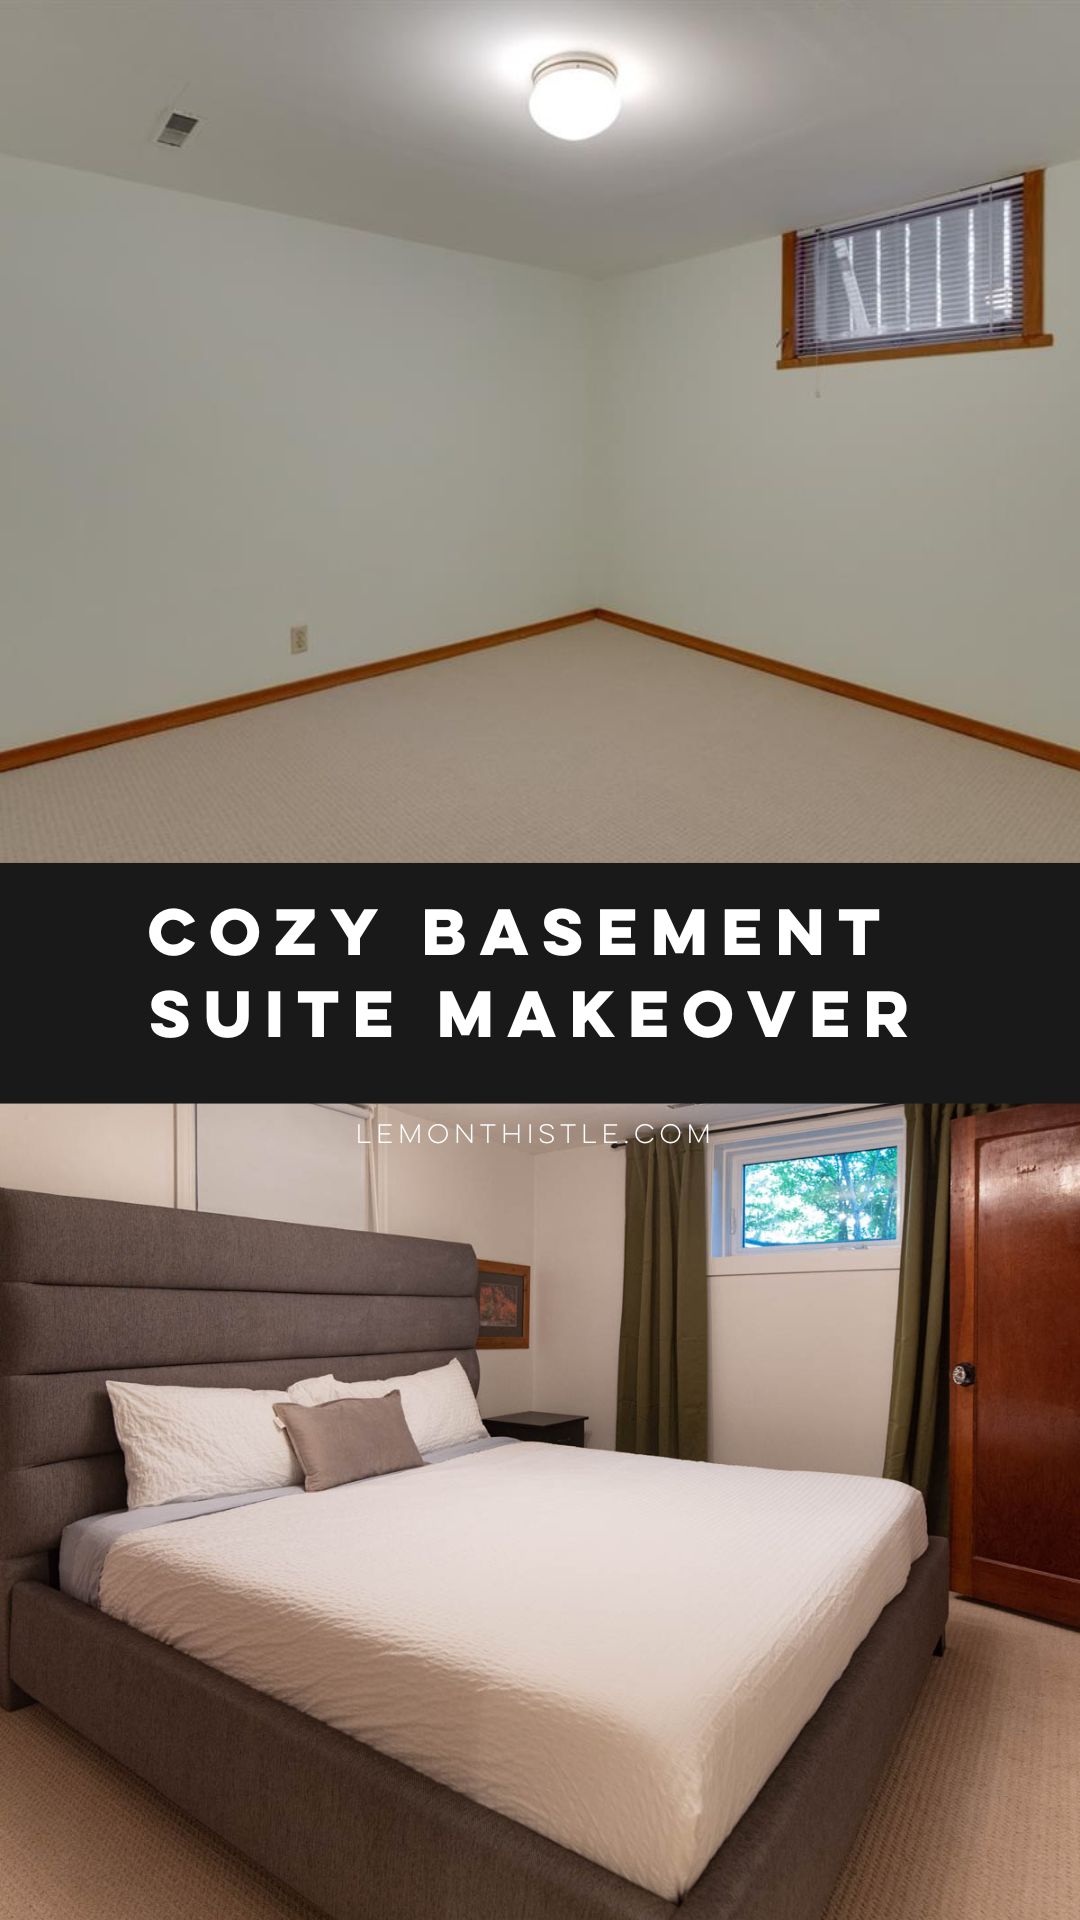 Cozy basement bedroom before and after photos with text over